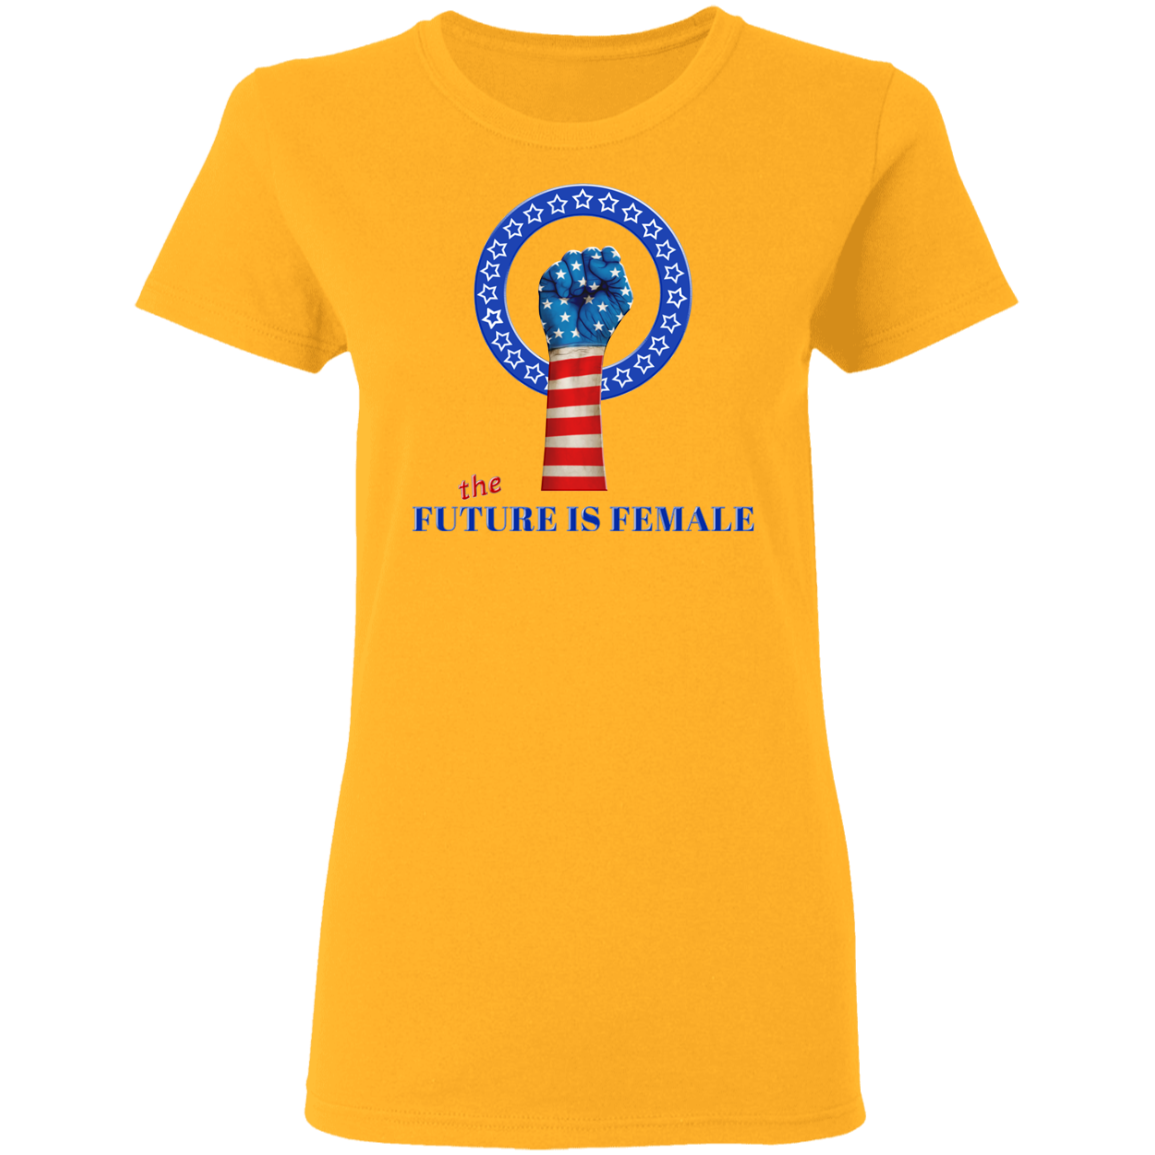 The Future Is Female  - Women's Relaxed Fit T-shirt